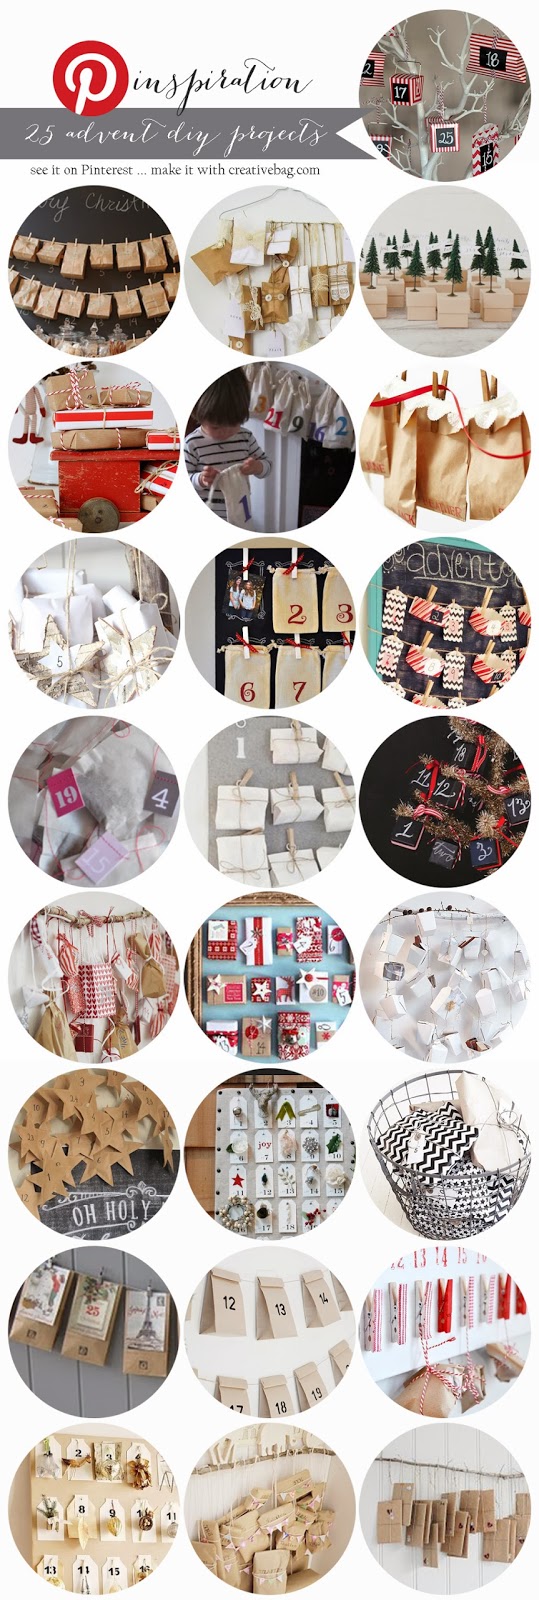 25 advent diy projects ... see it on Pinterest ... make it with creativebag.com